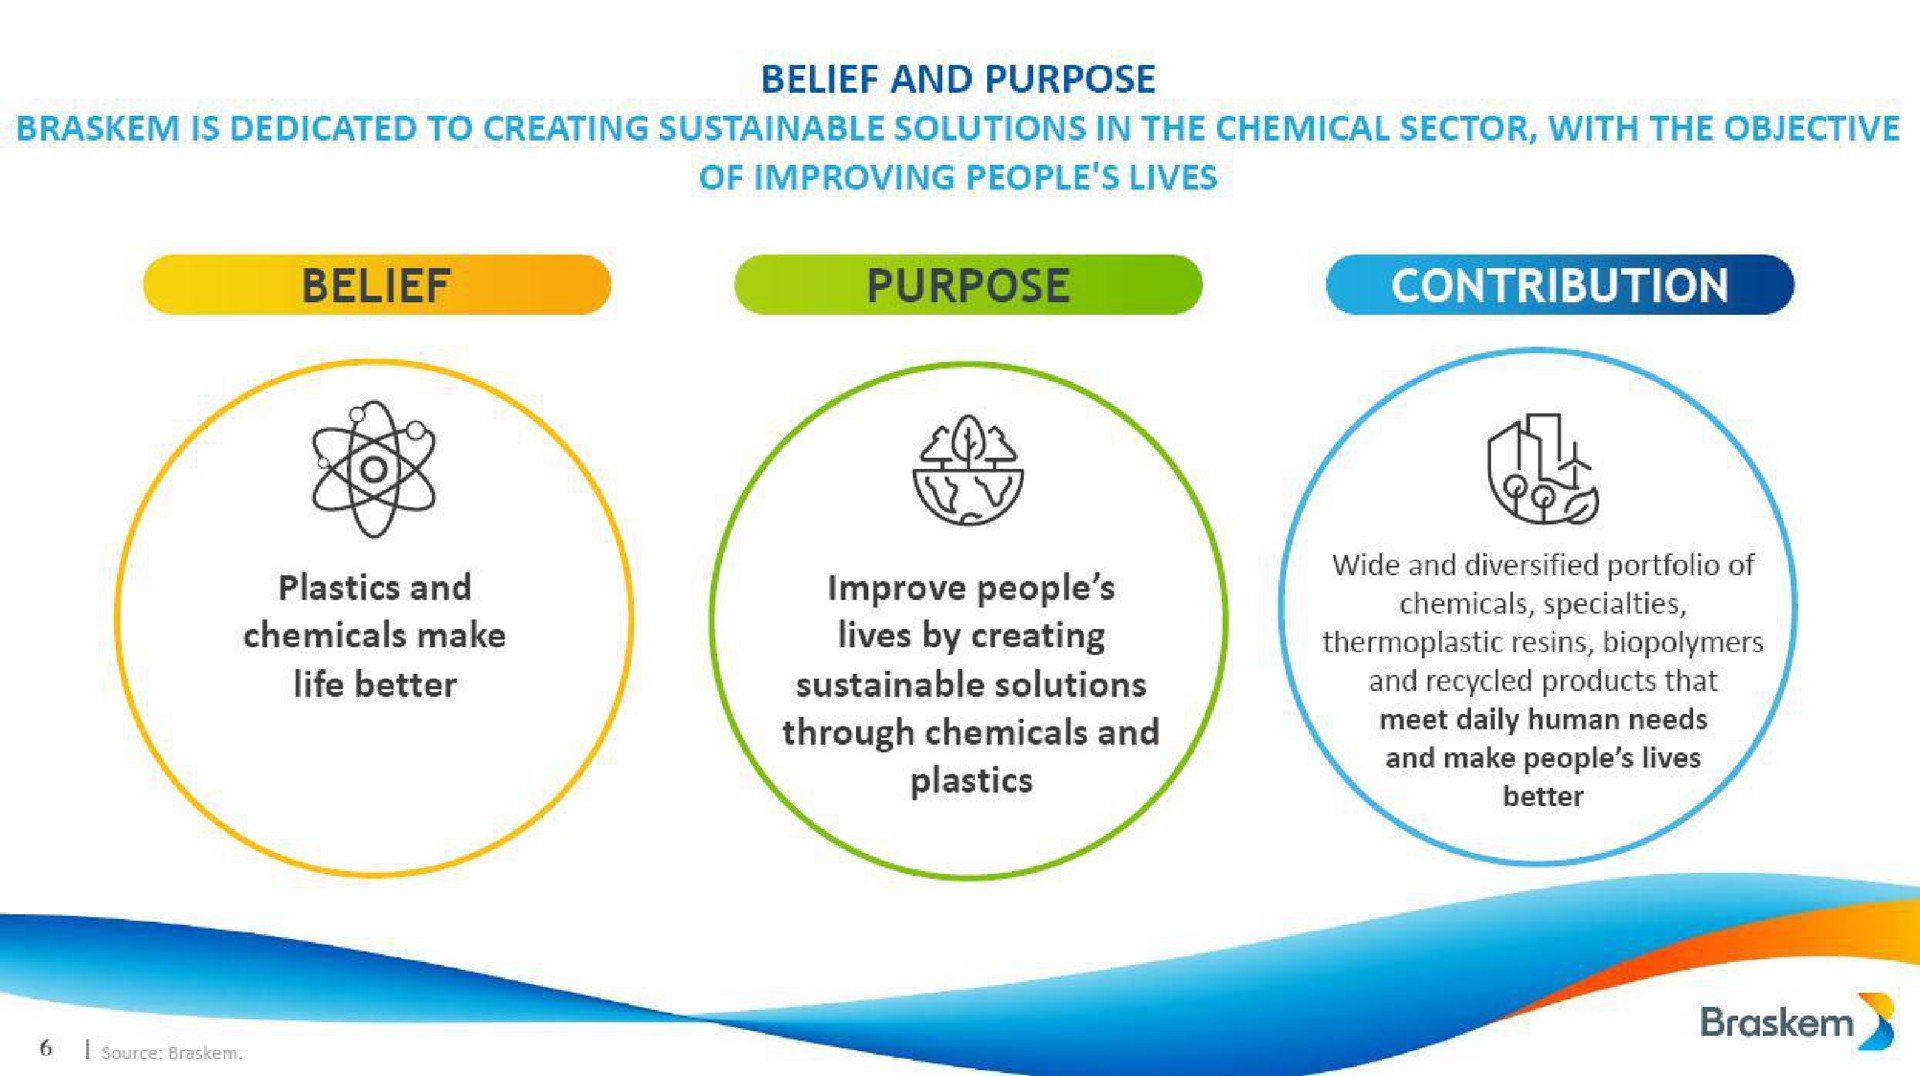 belief and purpose purpose life better improve people lives by creating sustainable solutions through chemicals and and recycled products that piper dolly human needs | Braskem